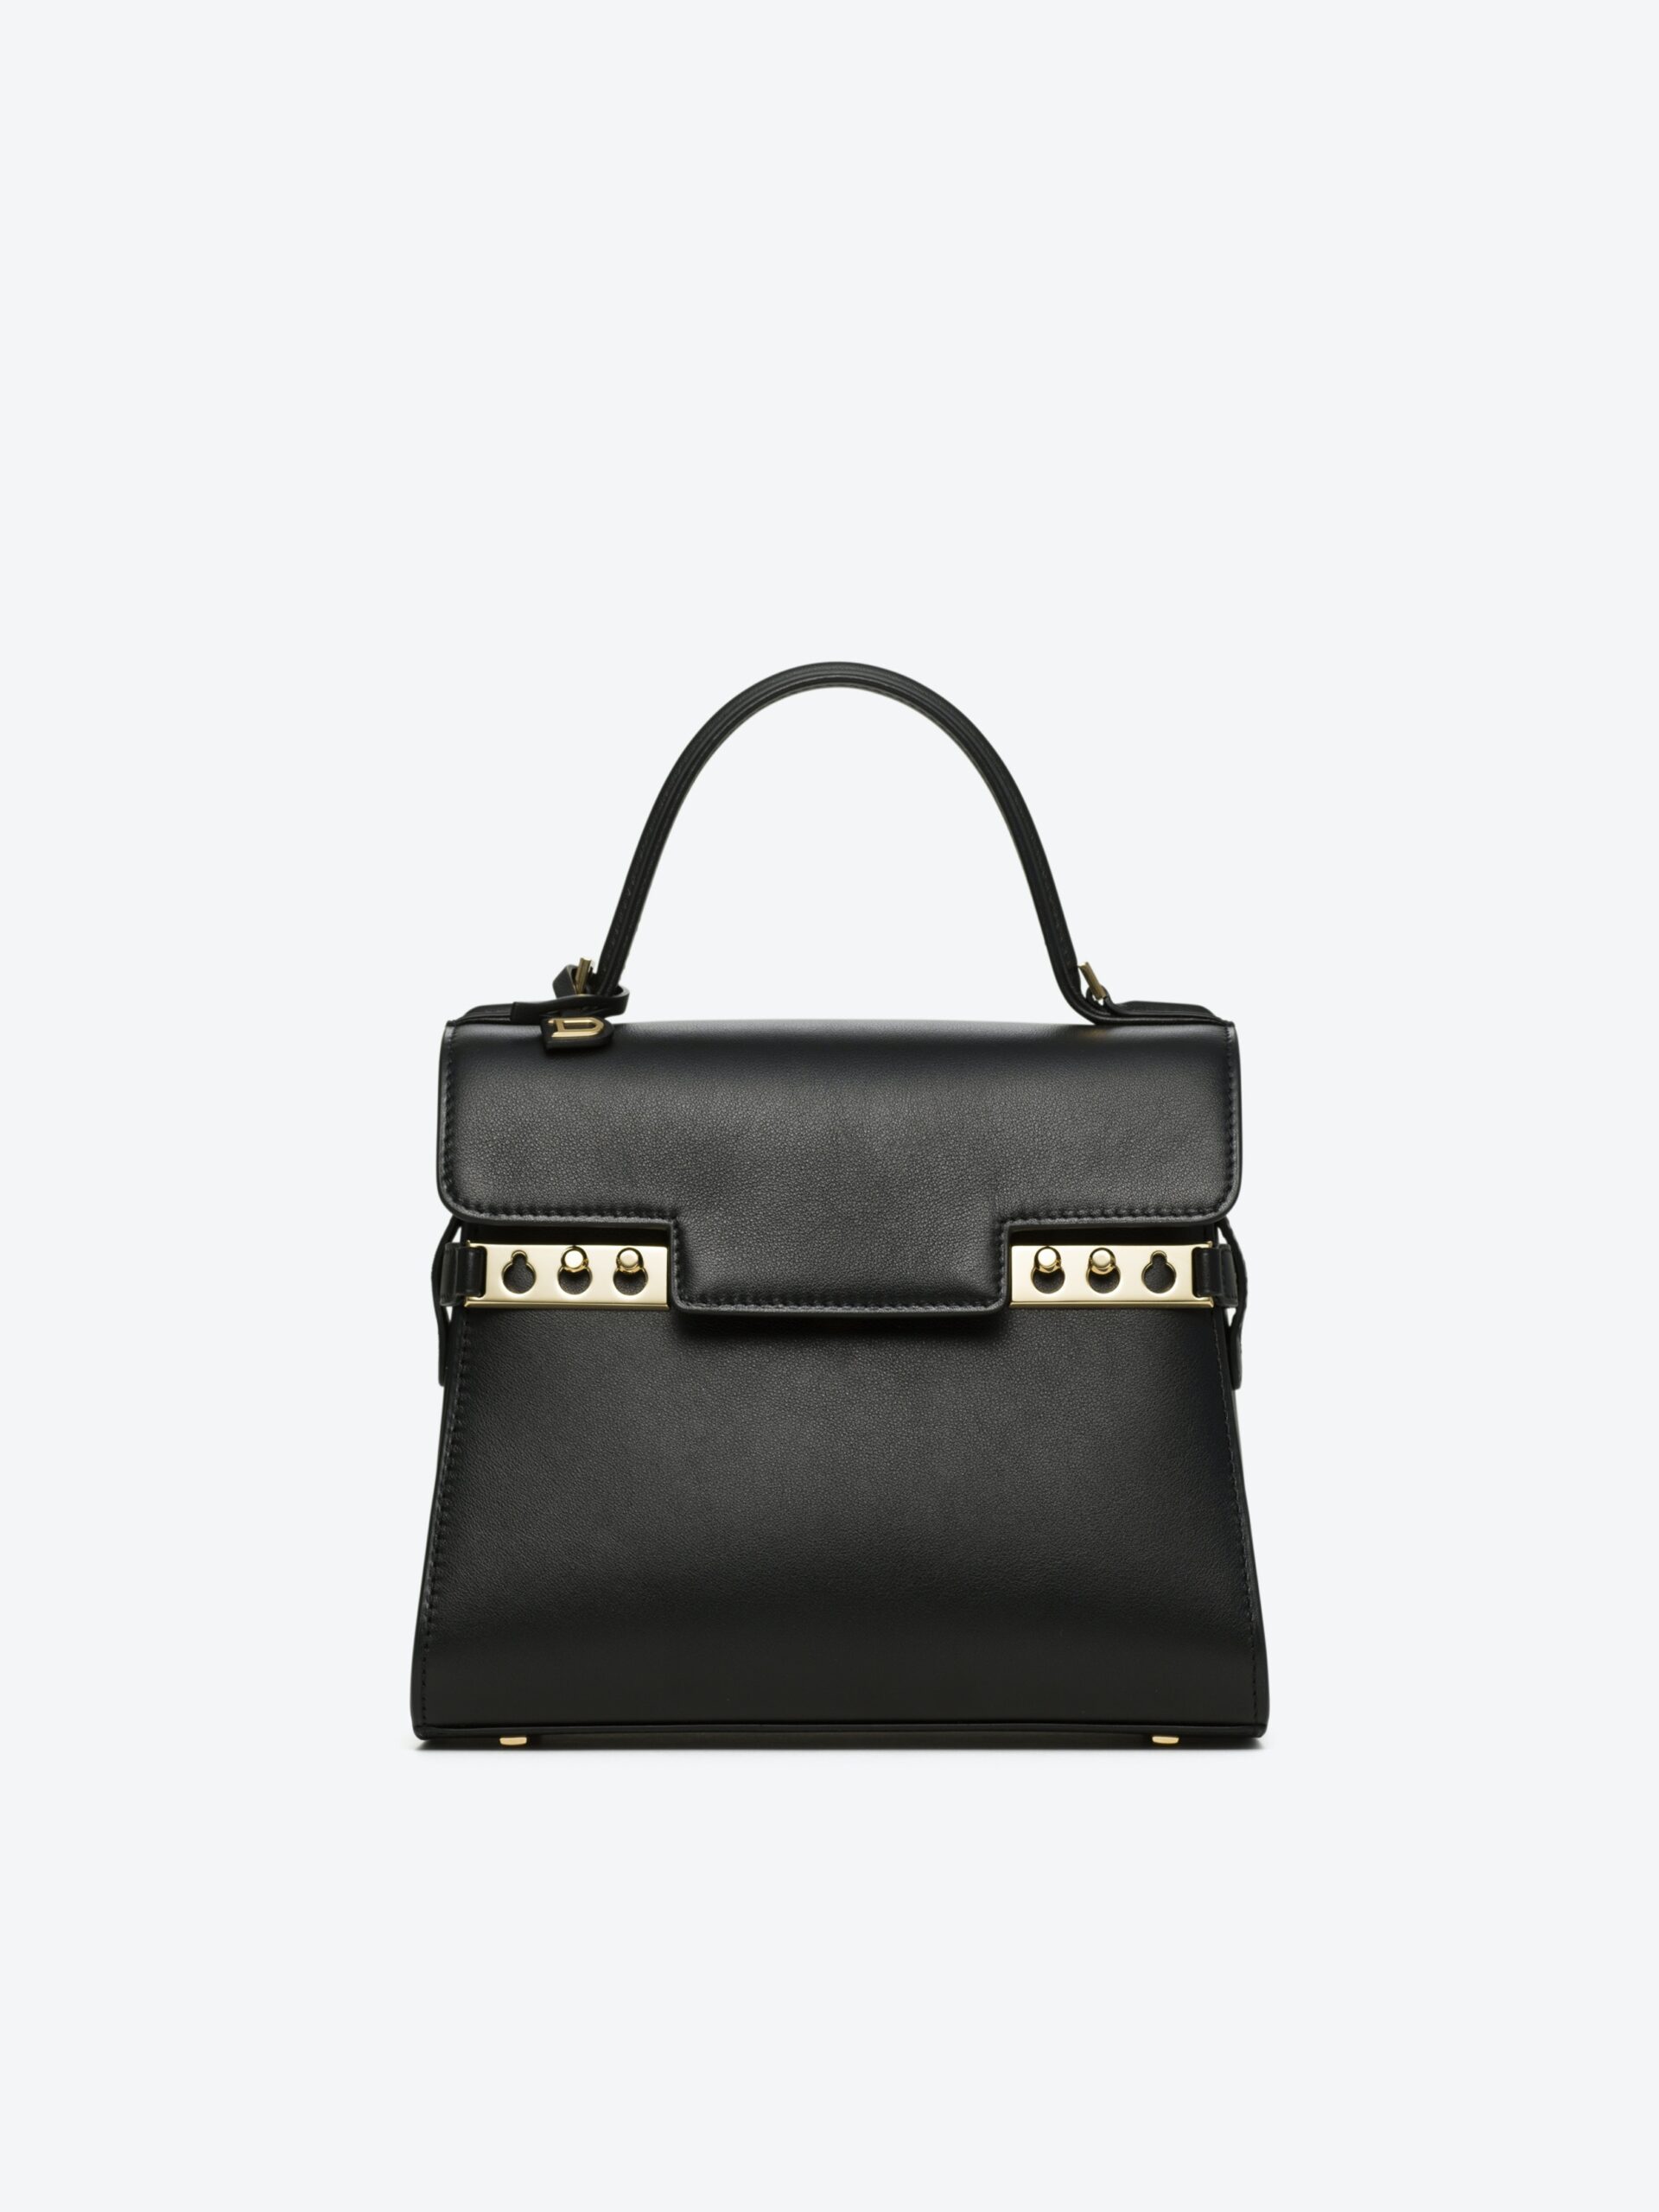 5 Delvaux Bags That Are Worth Collecting - luxfy